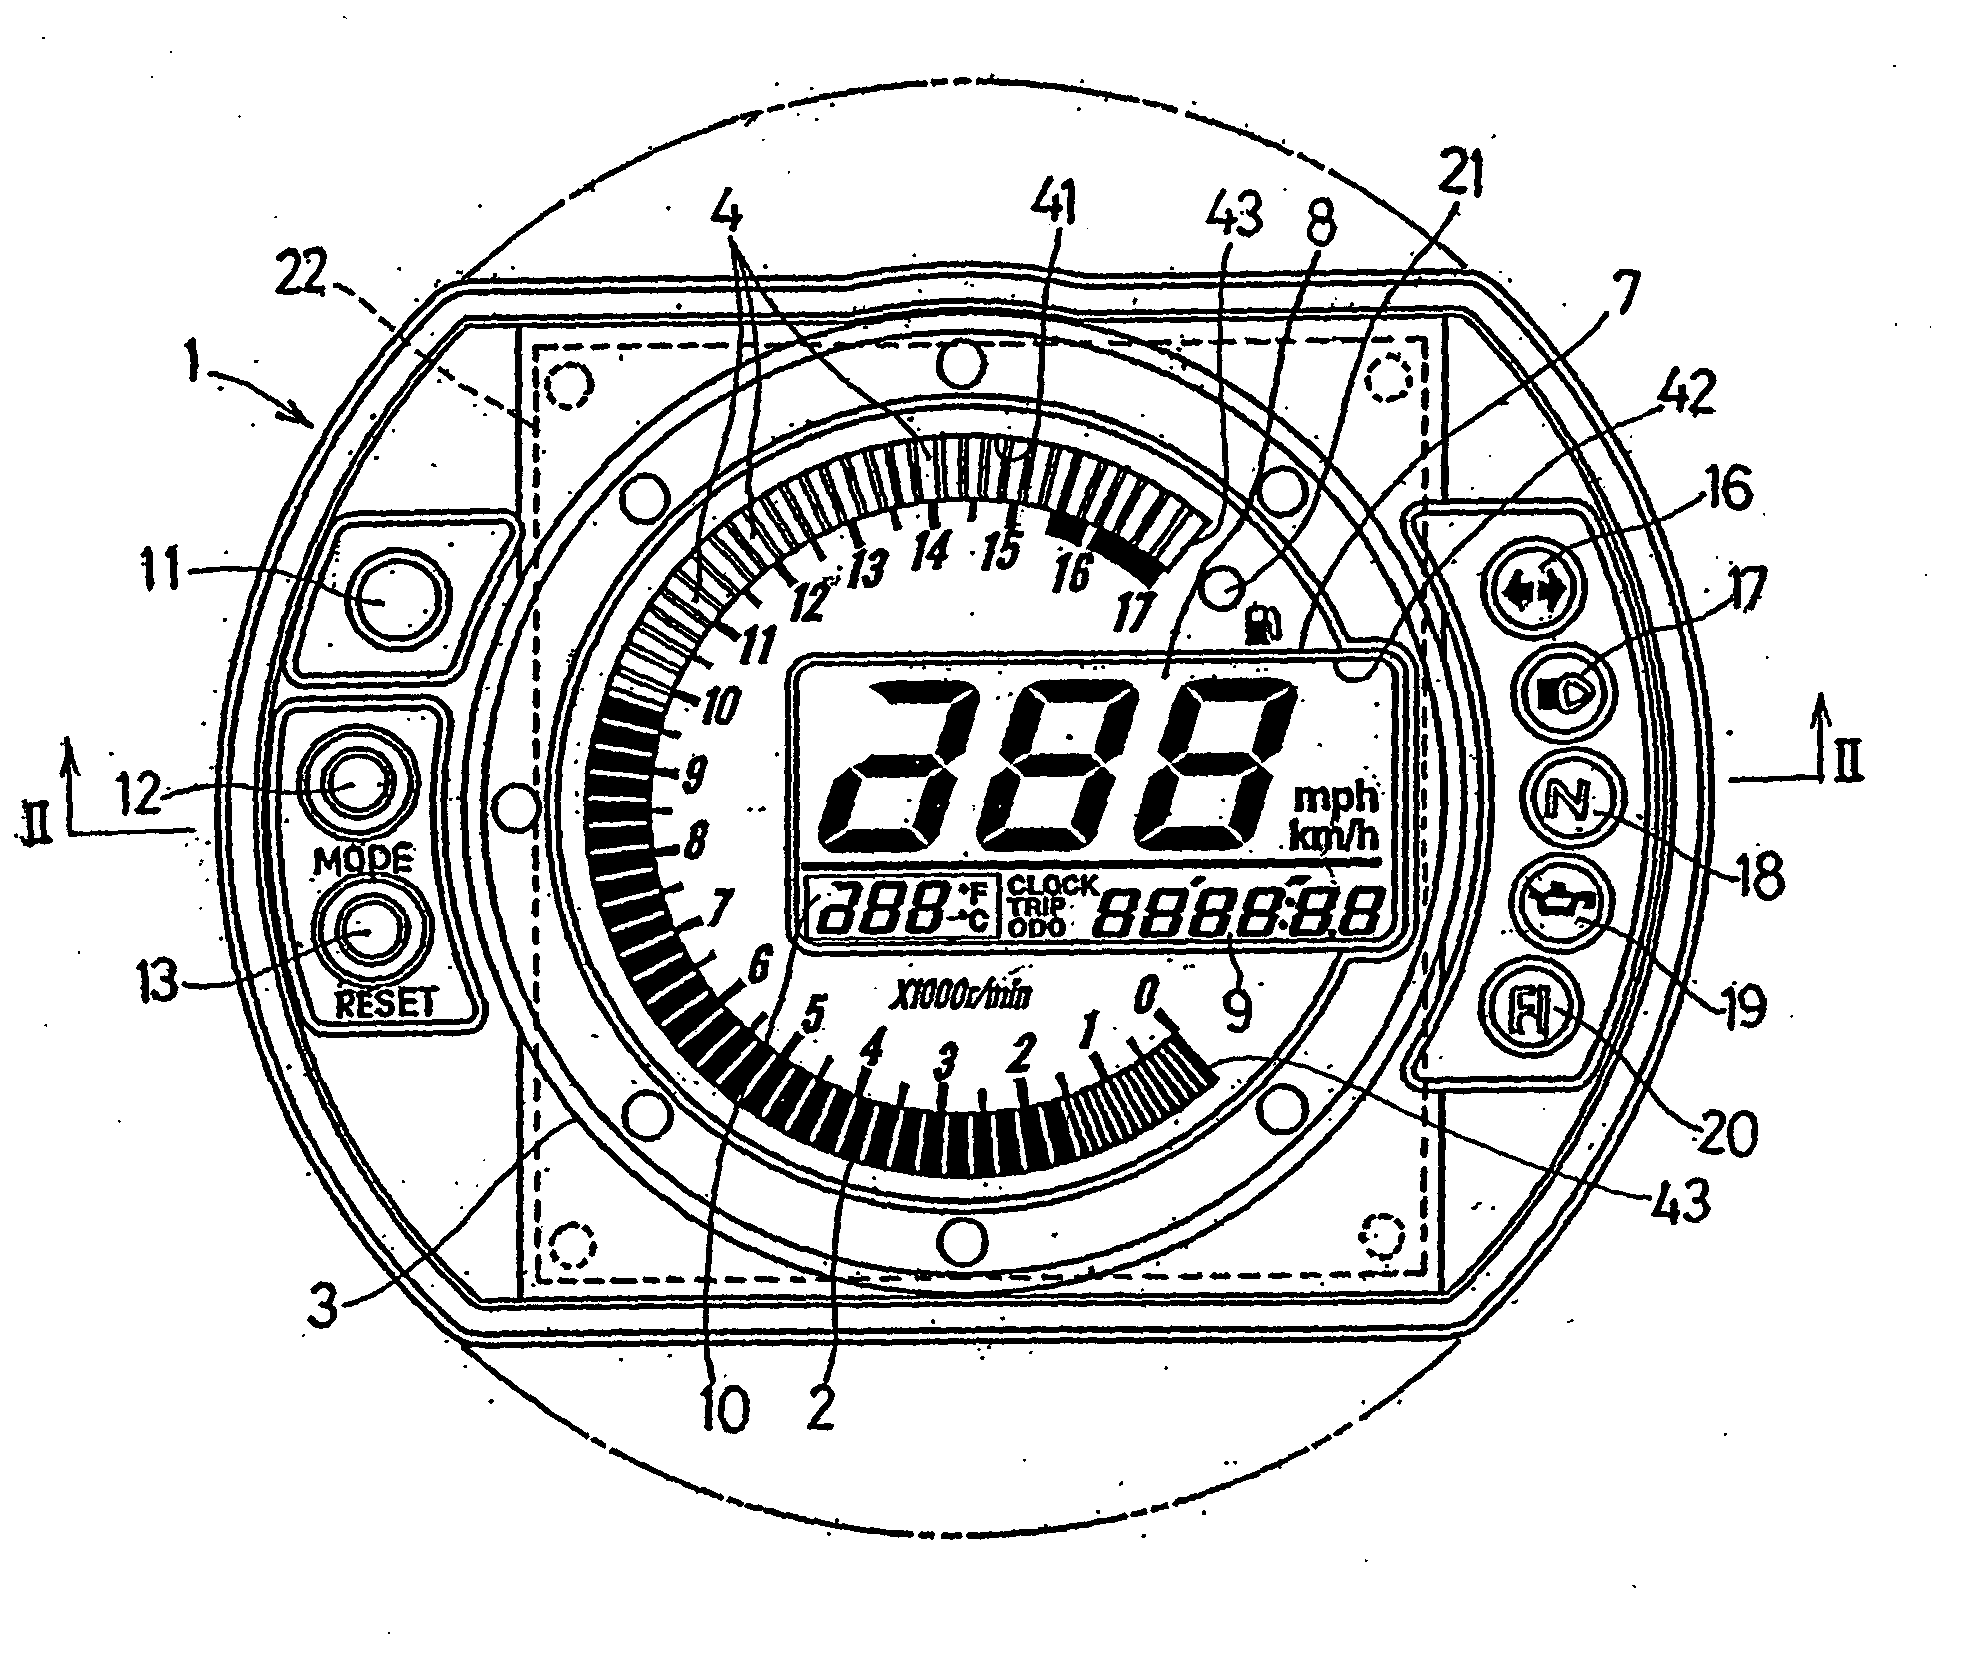 Combination indicator assembly in vehicle instrument panel